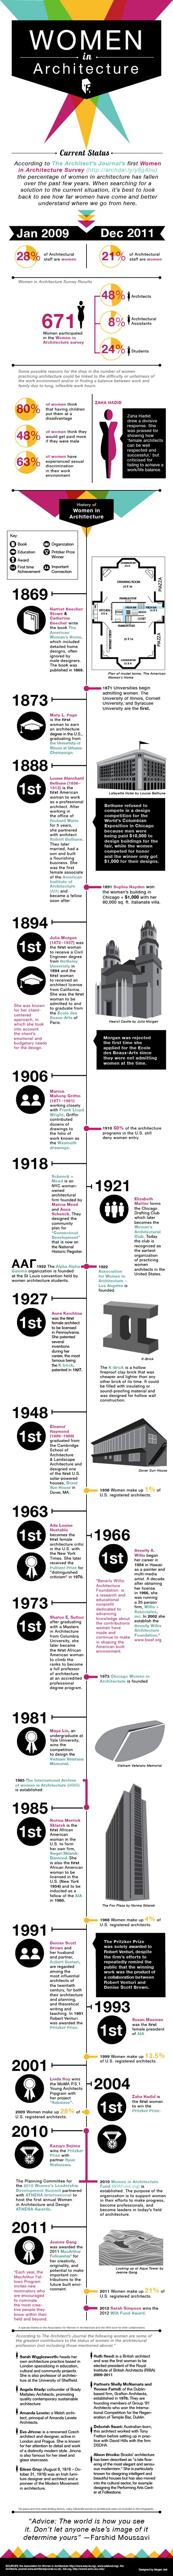 Women in Architecture Infographic